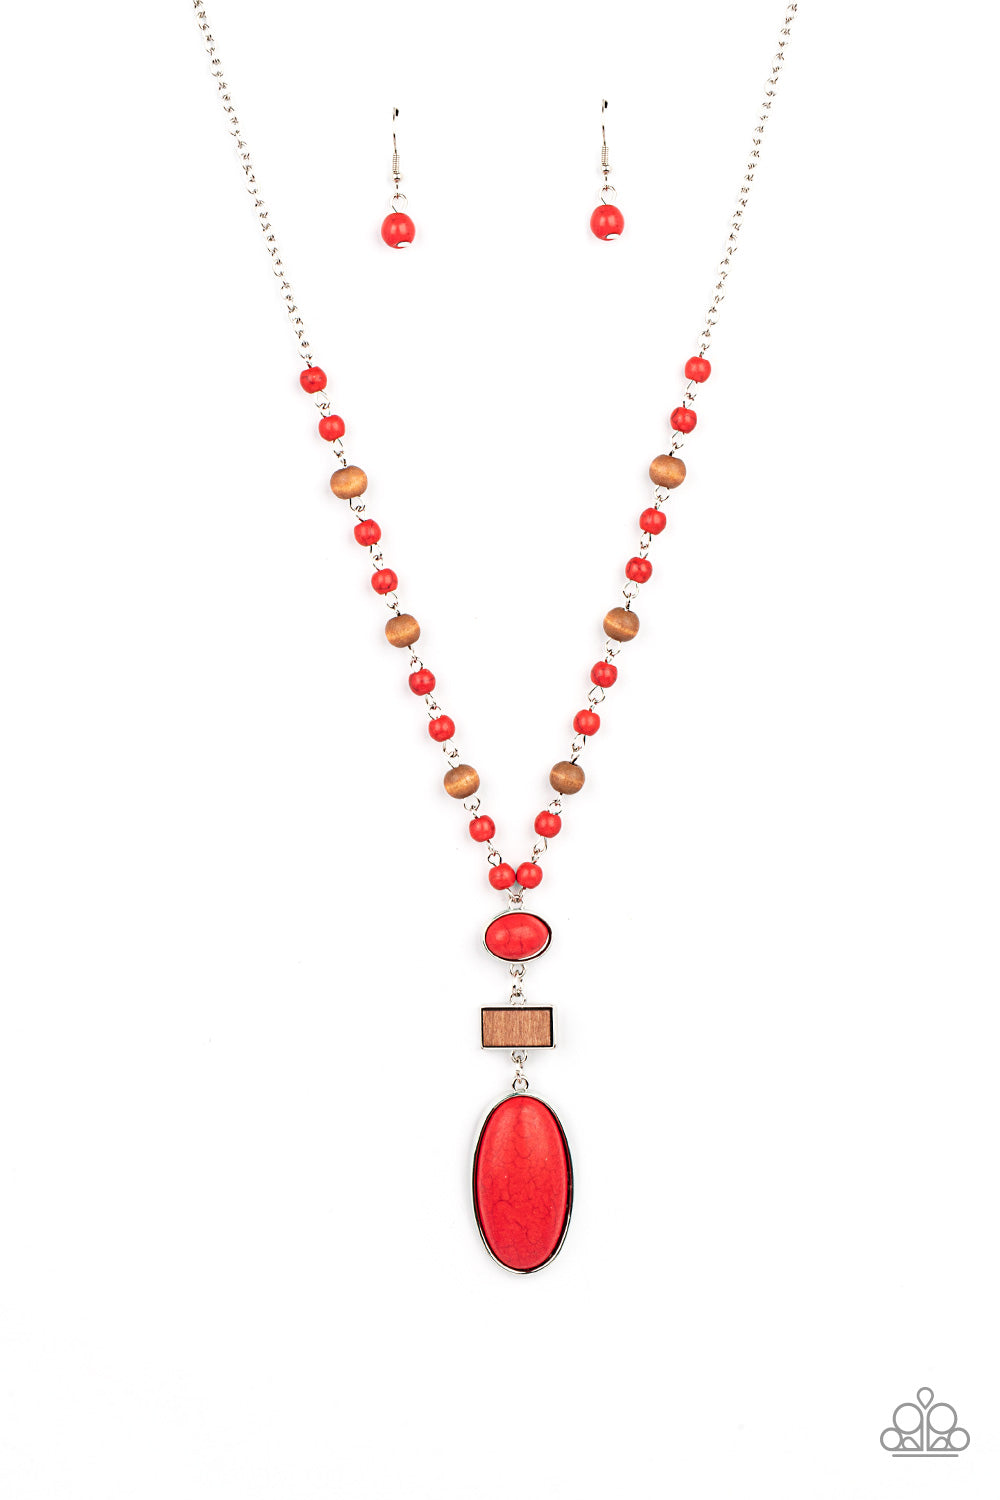 Naturally Essential Red Necklace - Paparazzi Accessories  A dainty collection of fiery red stone and rustic wooden beads connect into an earthy chain across the chest. Featuring sleek silver frames, oval red stones and a rectangular wood frame connect into a dramatically stacked seasonal pendant at the bottom for a colorful display. Features an adjustable clasp closure.  Sold as one individual necklace. Includes one pair of matching earrings.